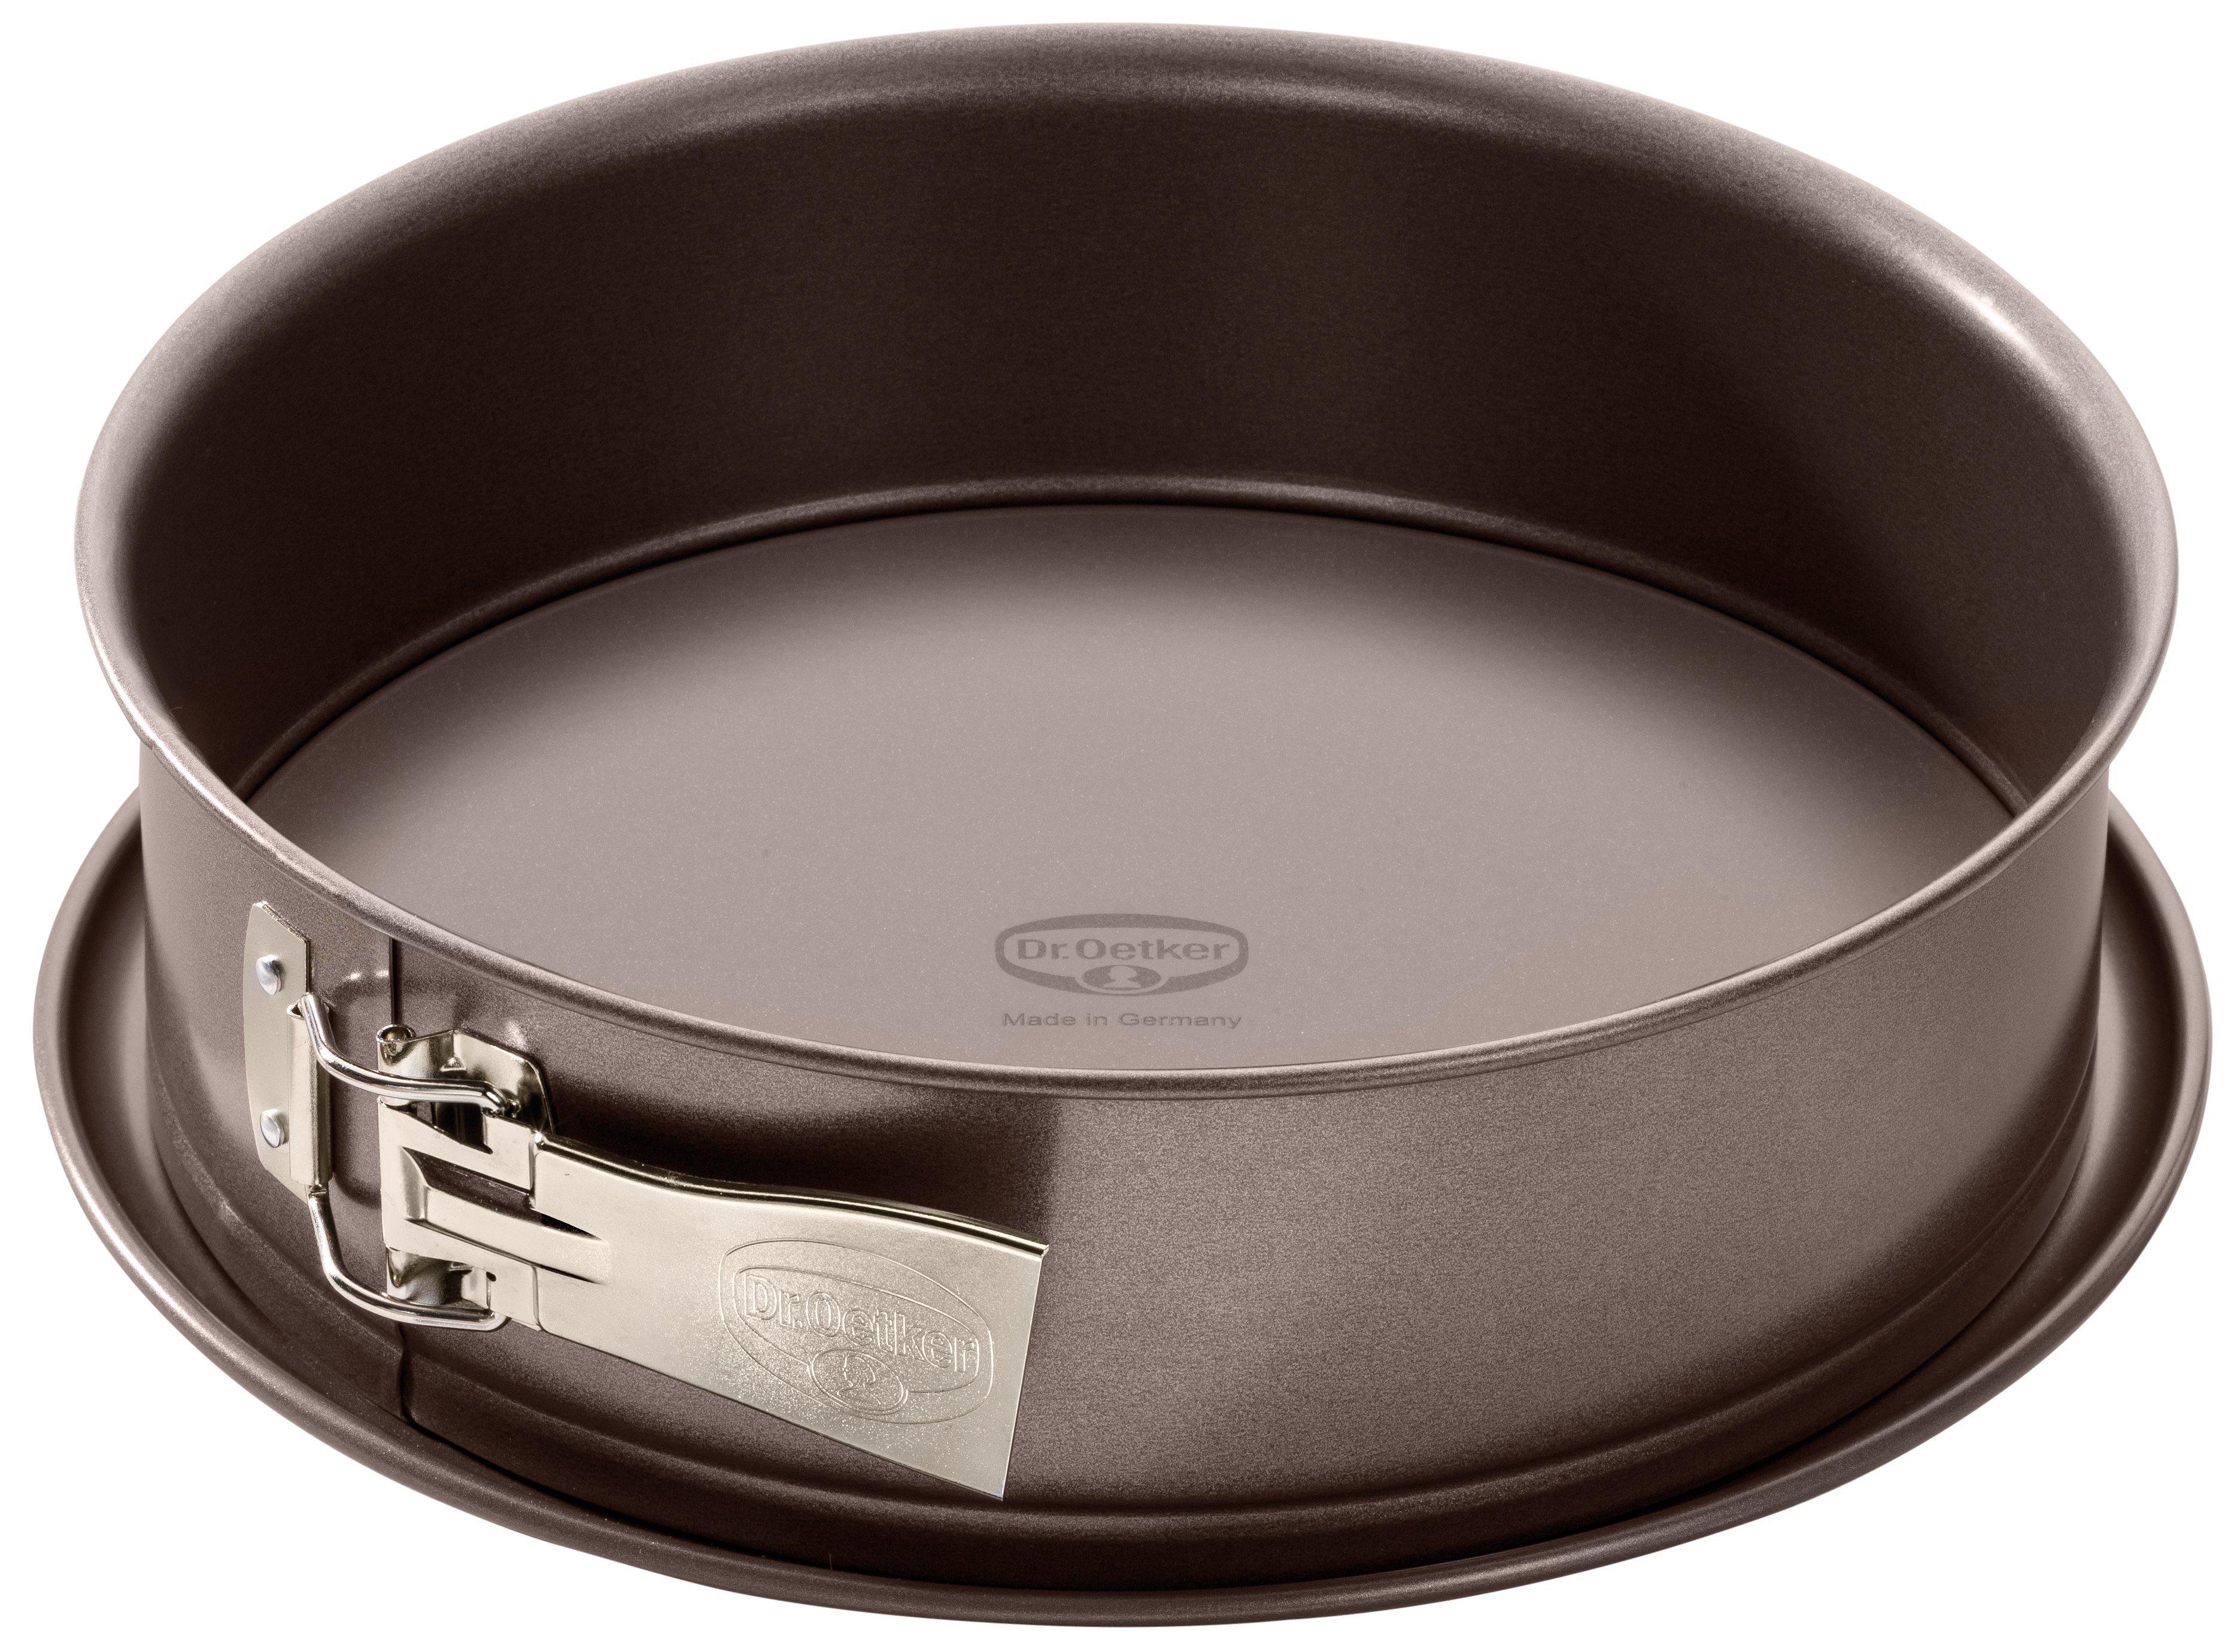 Dr. Oetker "Back-Edition" Springform With Enamel Base And Non-Stick Ring, Brown, 28X8 Cm - Whole and All